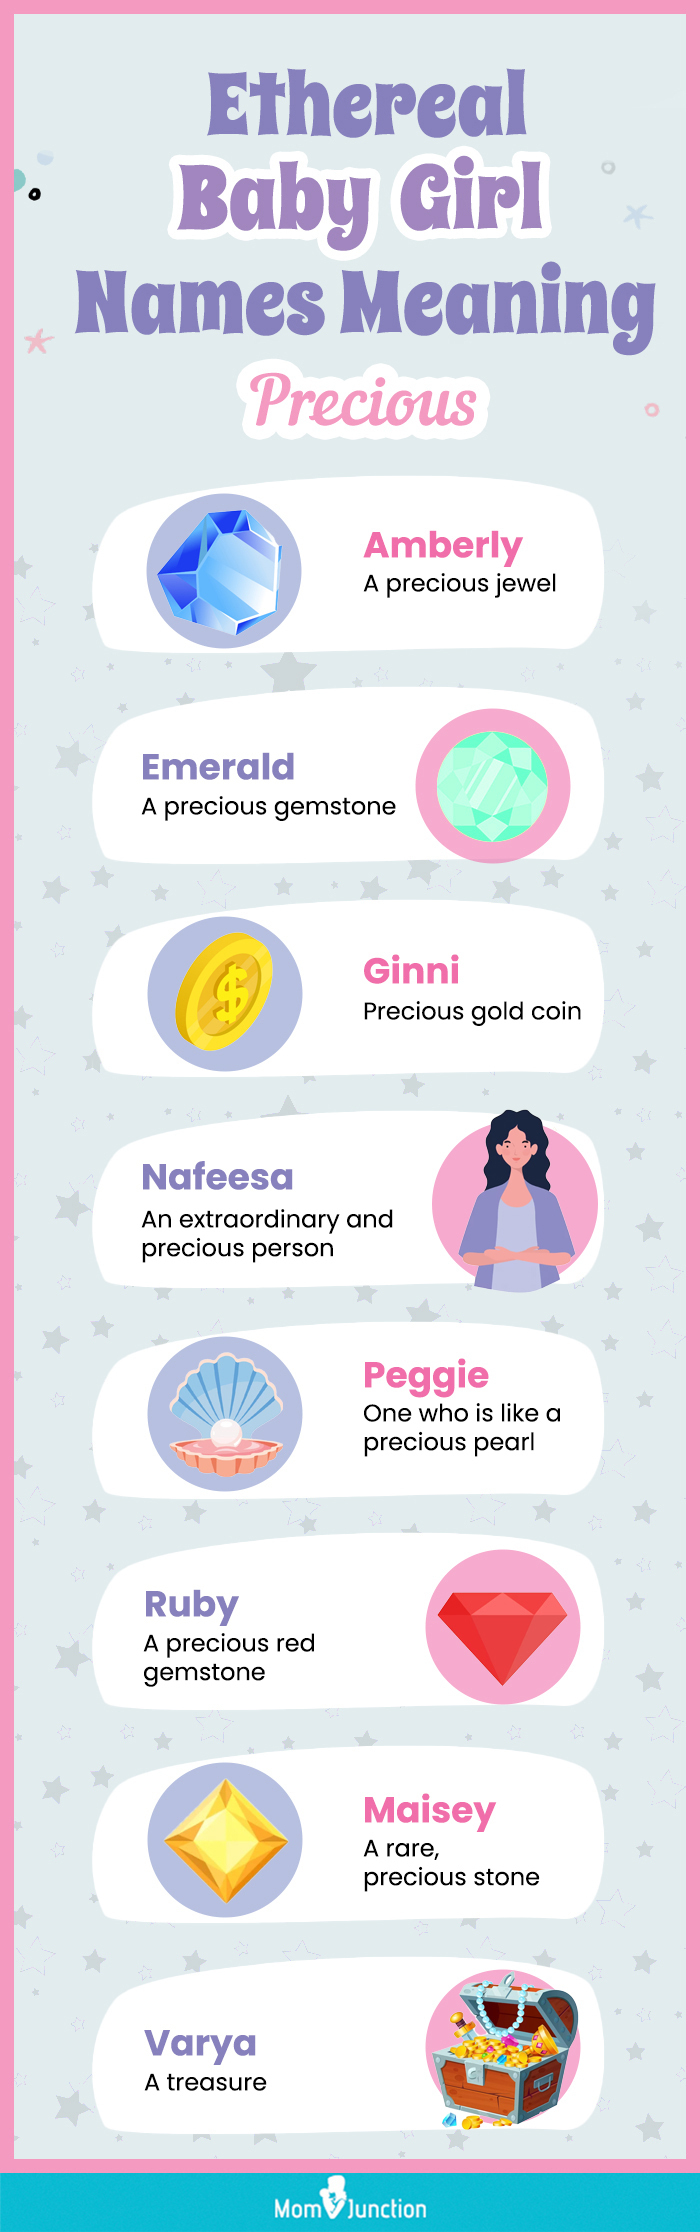 ethereal baby girl names meaning precious (infographic)